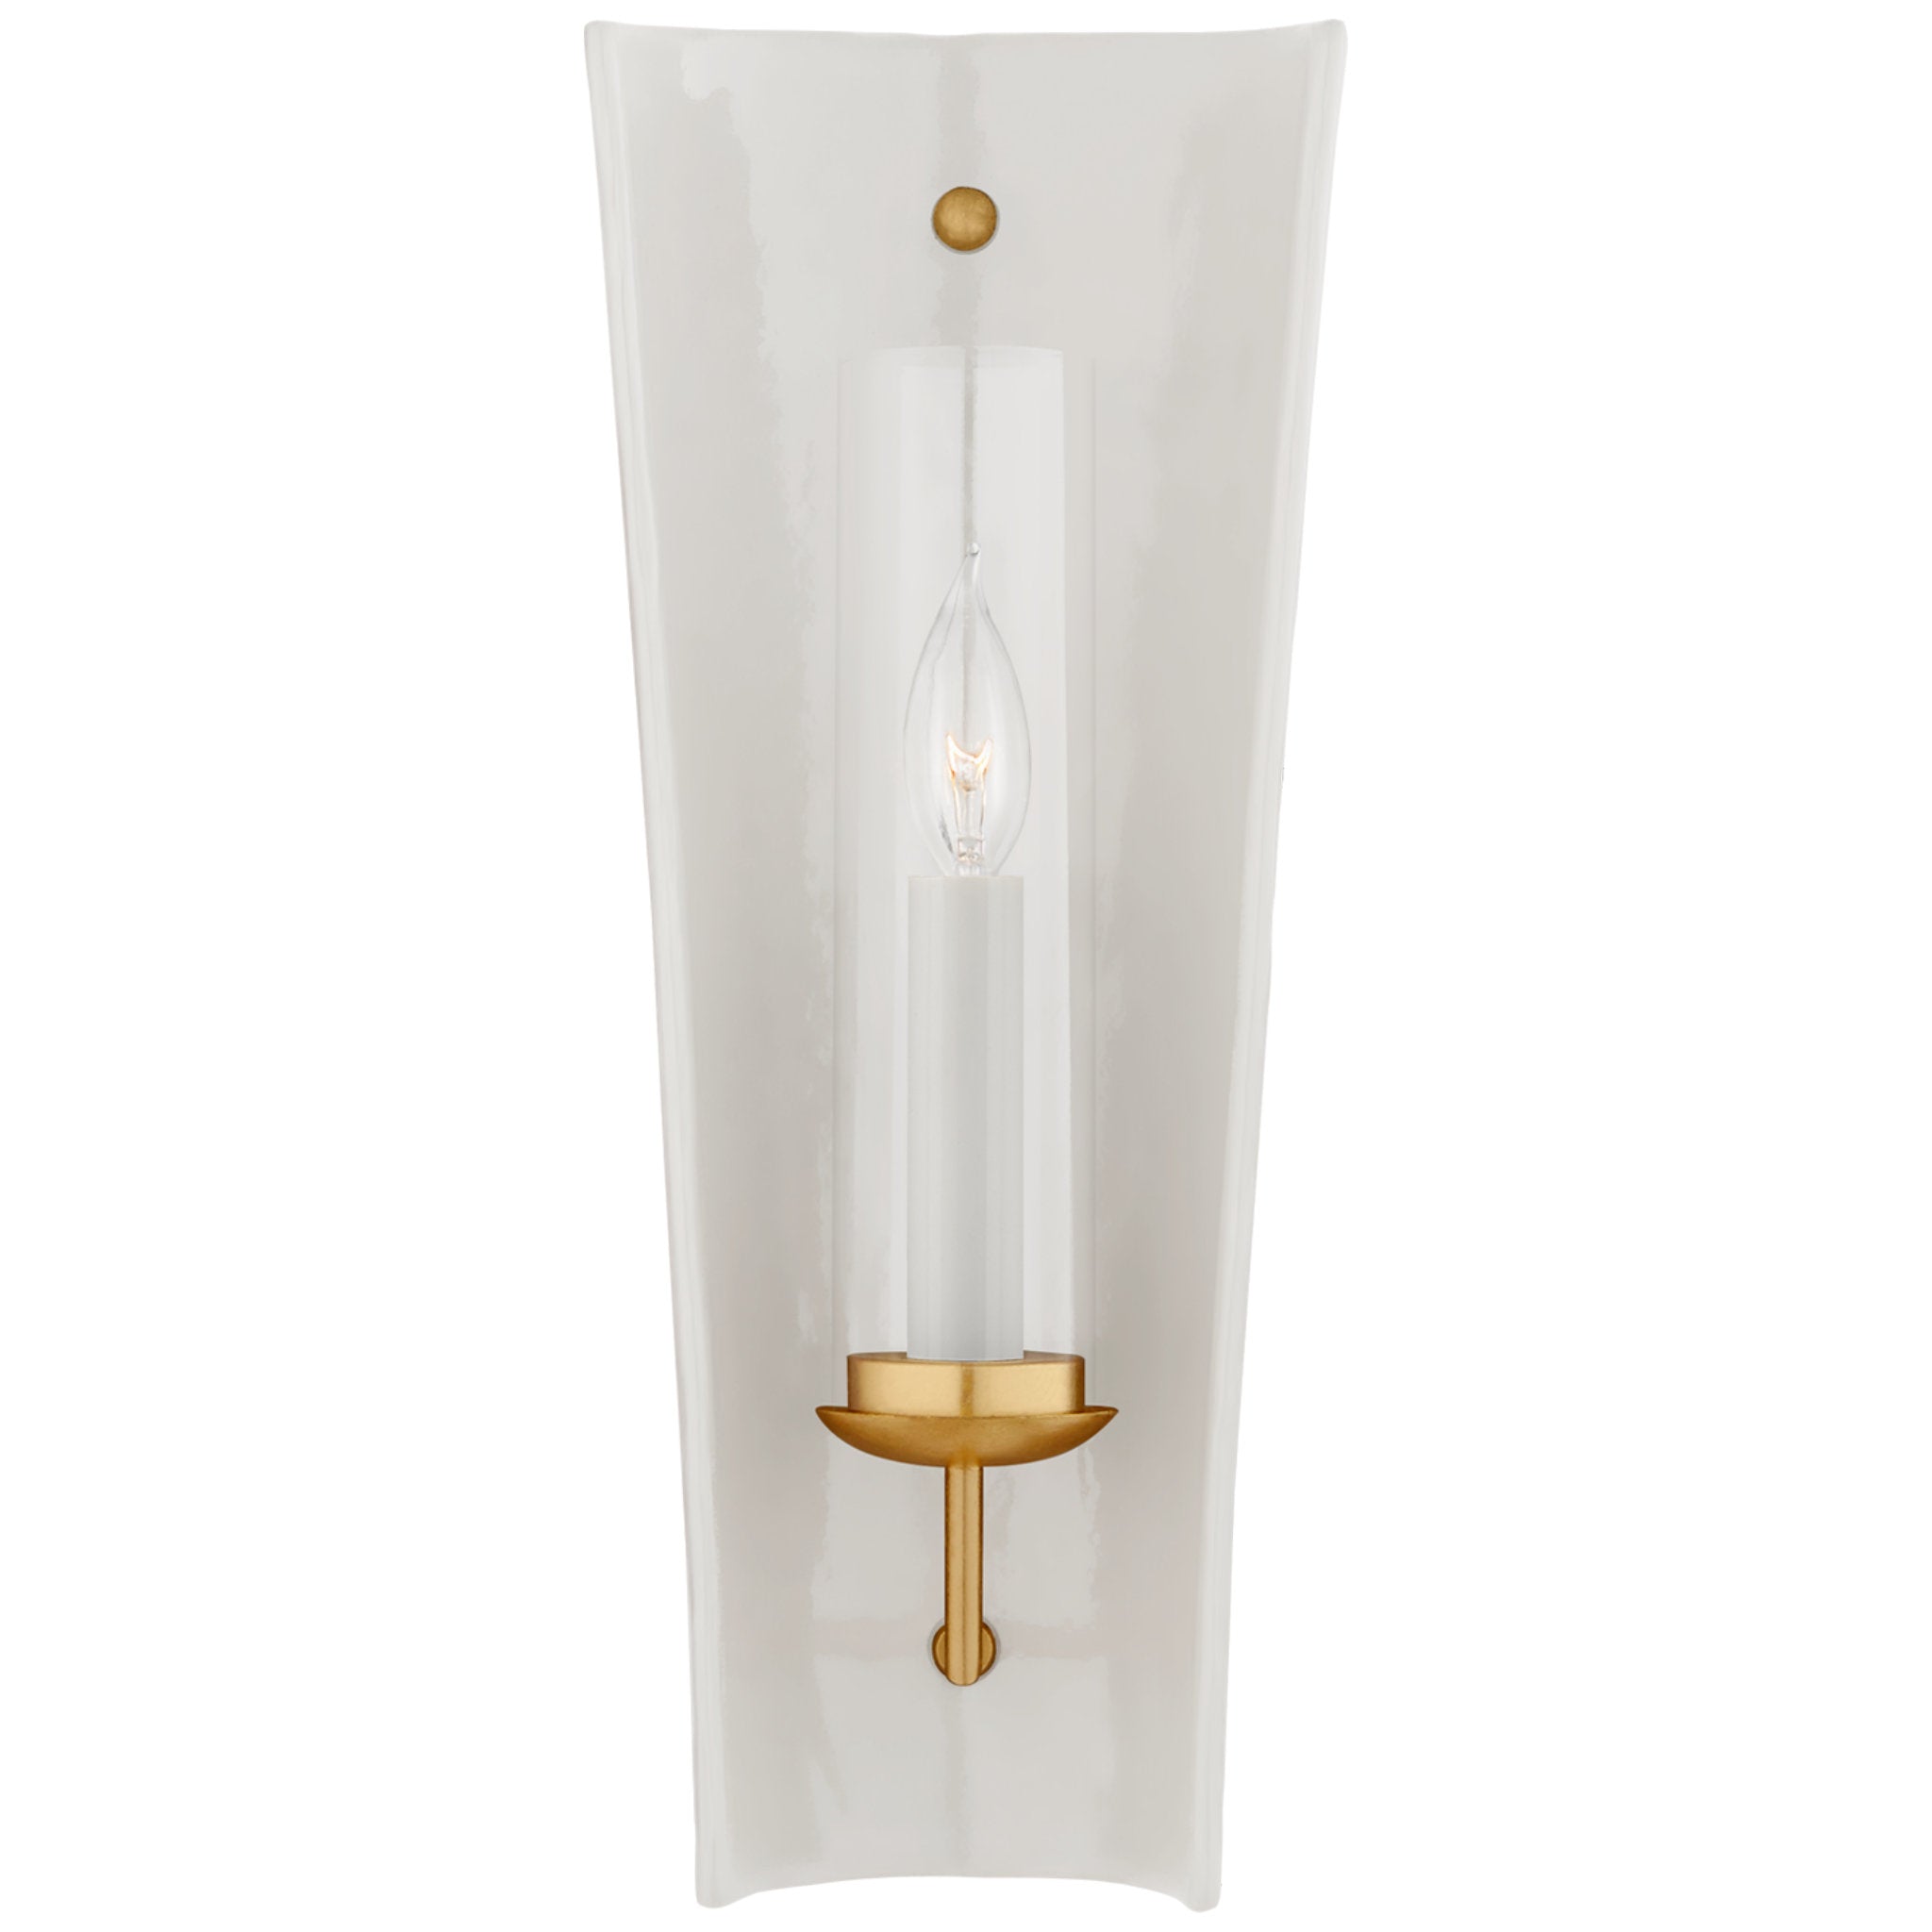 Chapman & Myers Downey Medium Reflector Sconce in White and Gild with Clear Glass